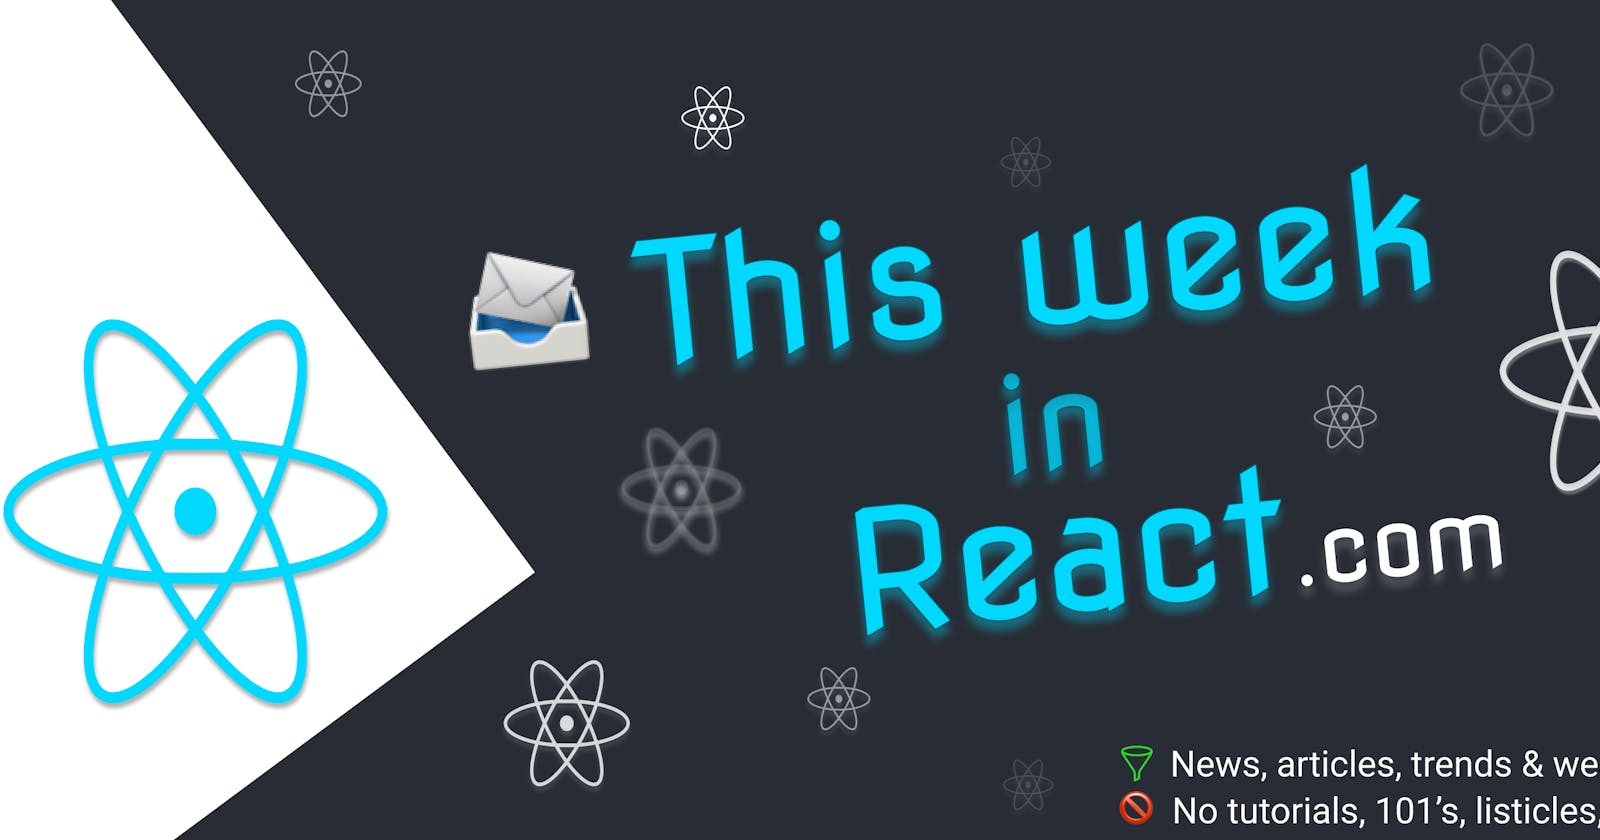 This Week In React #119: React OG Images, Tremor, Storybook, Decoupling, Rendering, Remix, Qwik, TypeScript, Playwright...